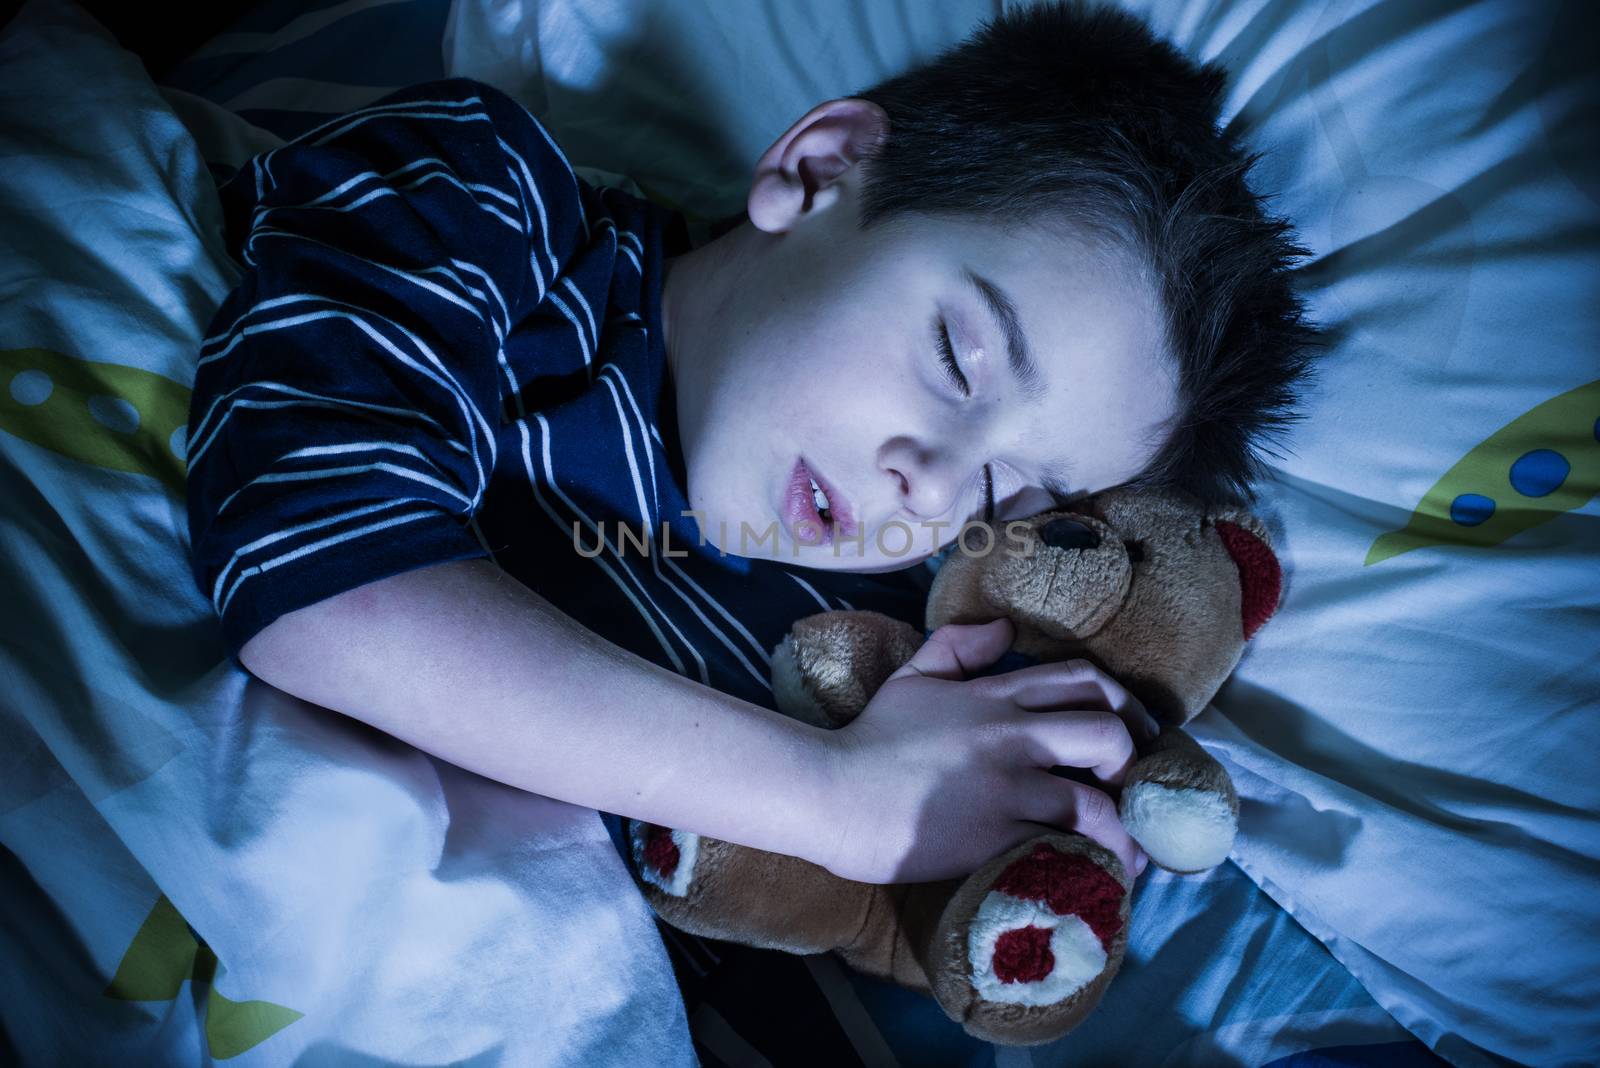 Sleeping child with his toy bear.